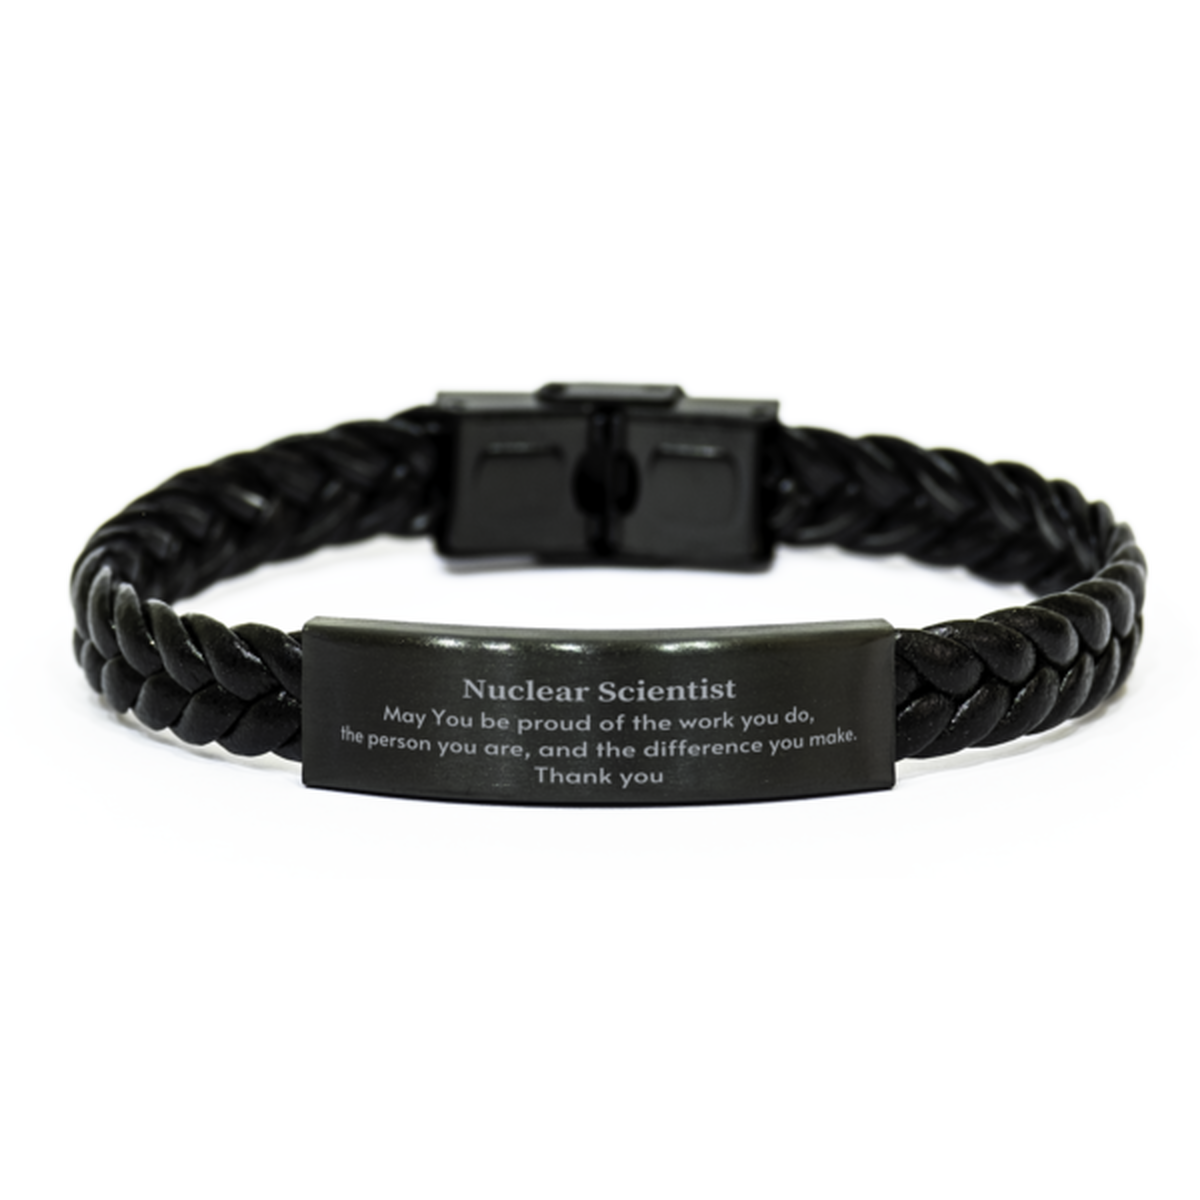 Heartwarming Braided Leather Bracelet Retirement Coworkers Gifts for Nuclear Scientist, Nuclear Scientist May You be proud of the work you do, the person you are Gifts for Boss Men Women Friends